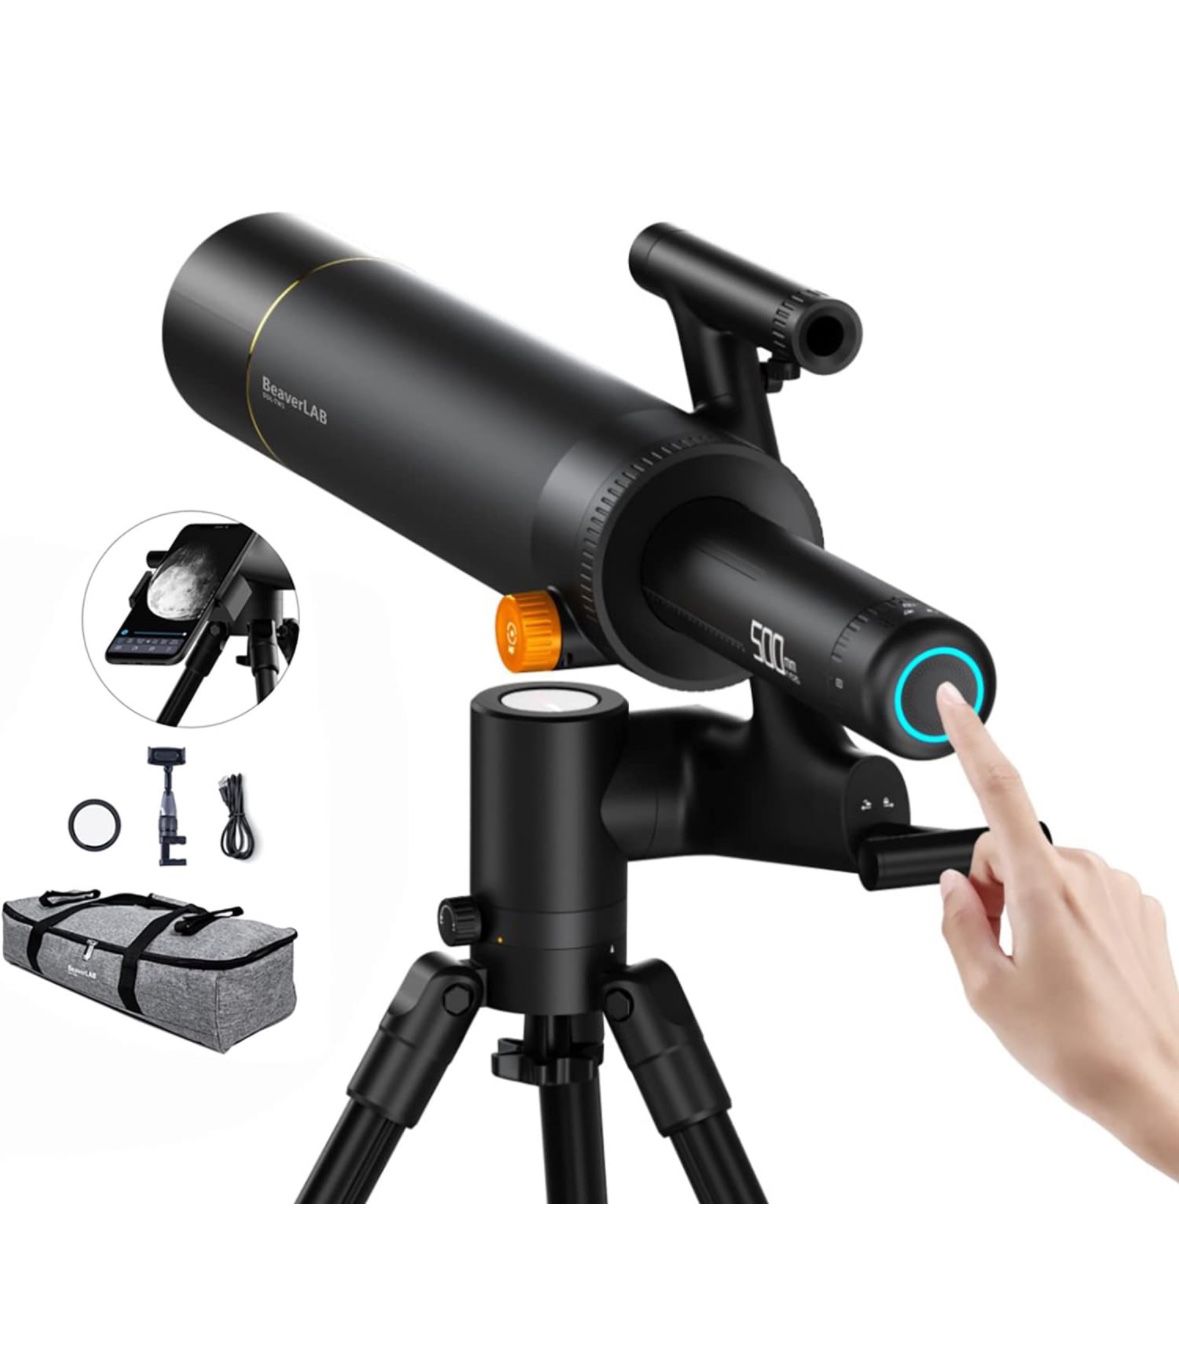 TW1 Smart Digital Astronomy Telescope, 500mm Long Focal Length, Compact and Portable, HD Video, WiFi Connected, 1600x Magnification, with APP for Teen